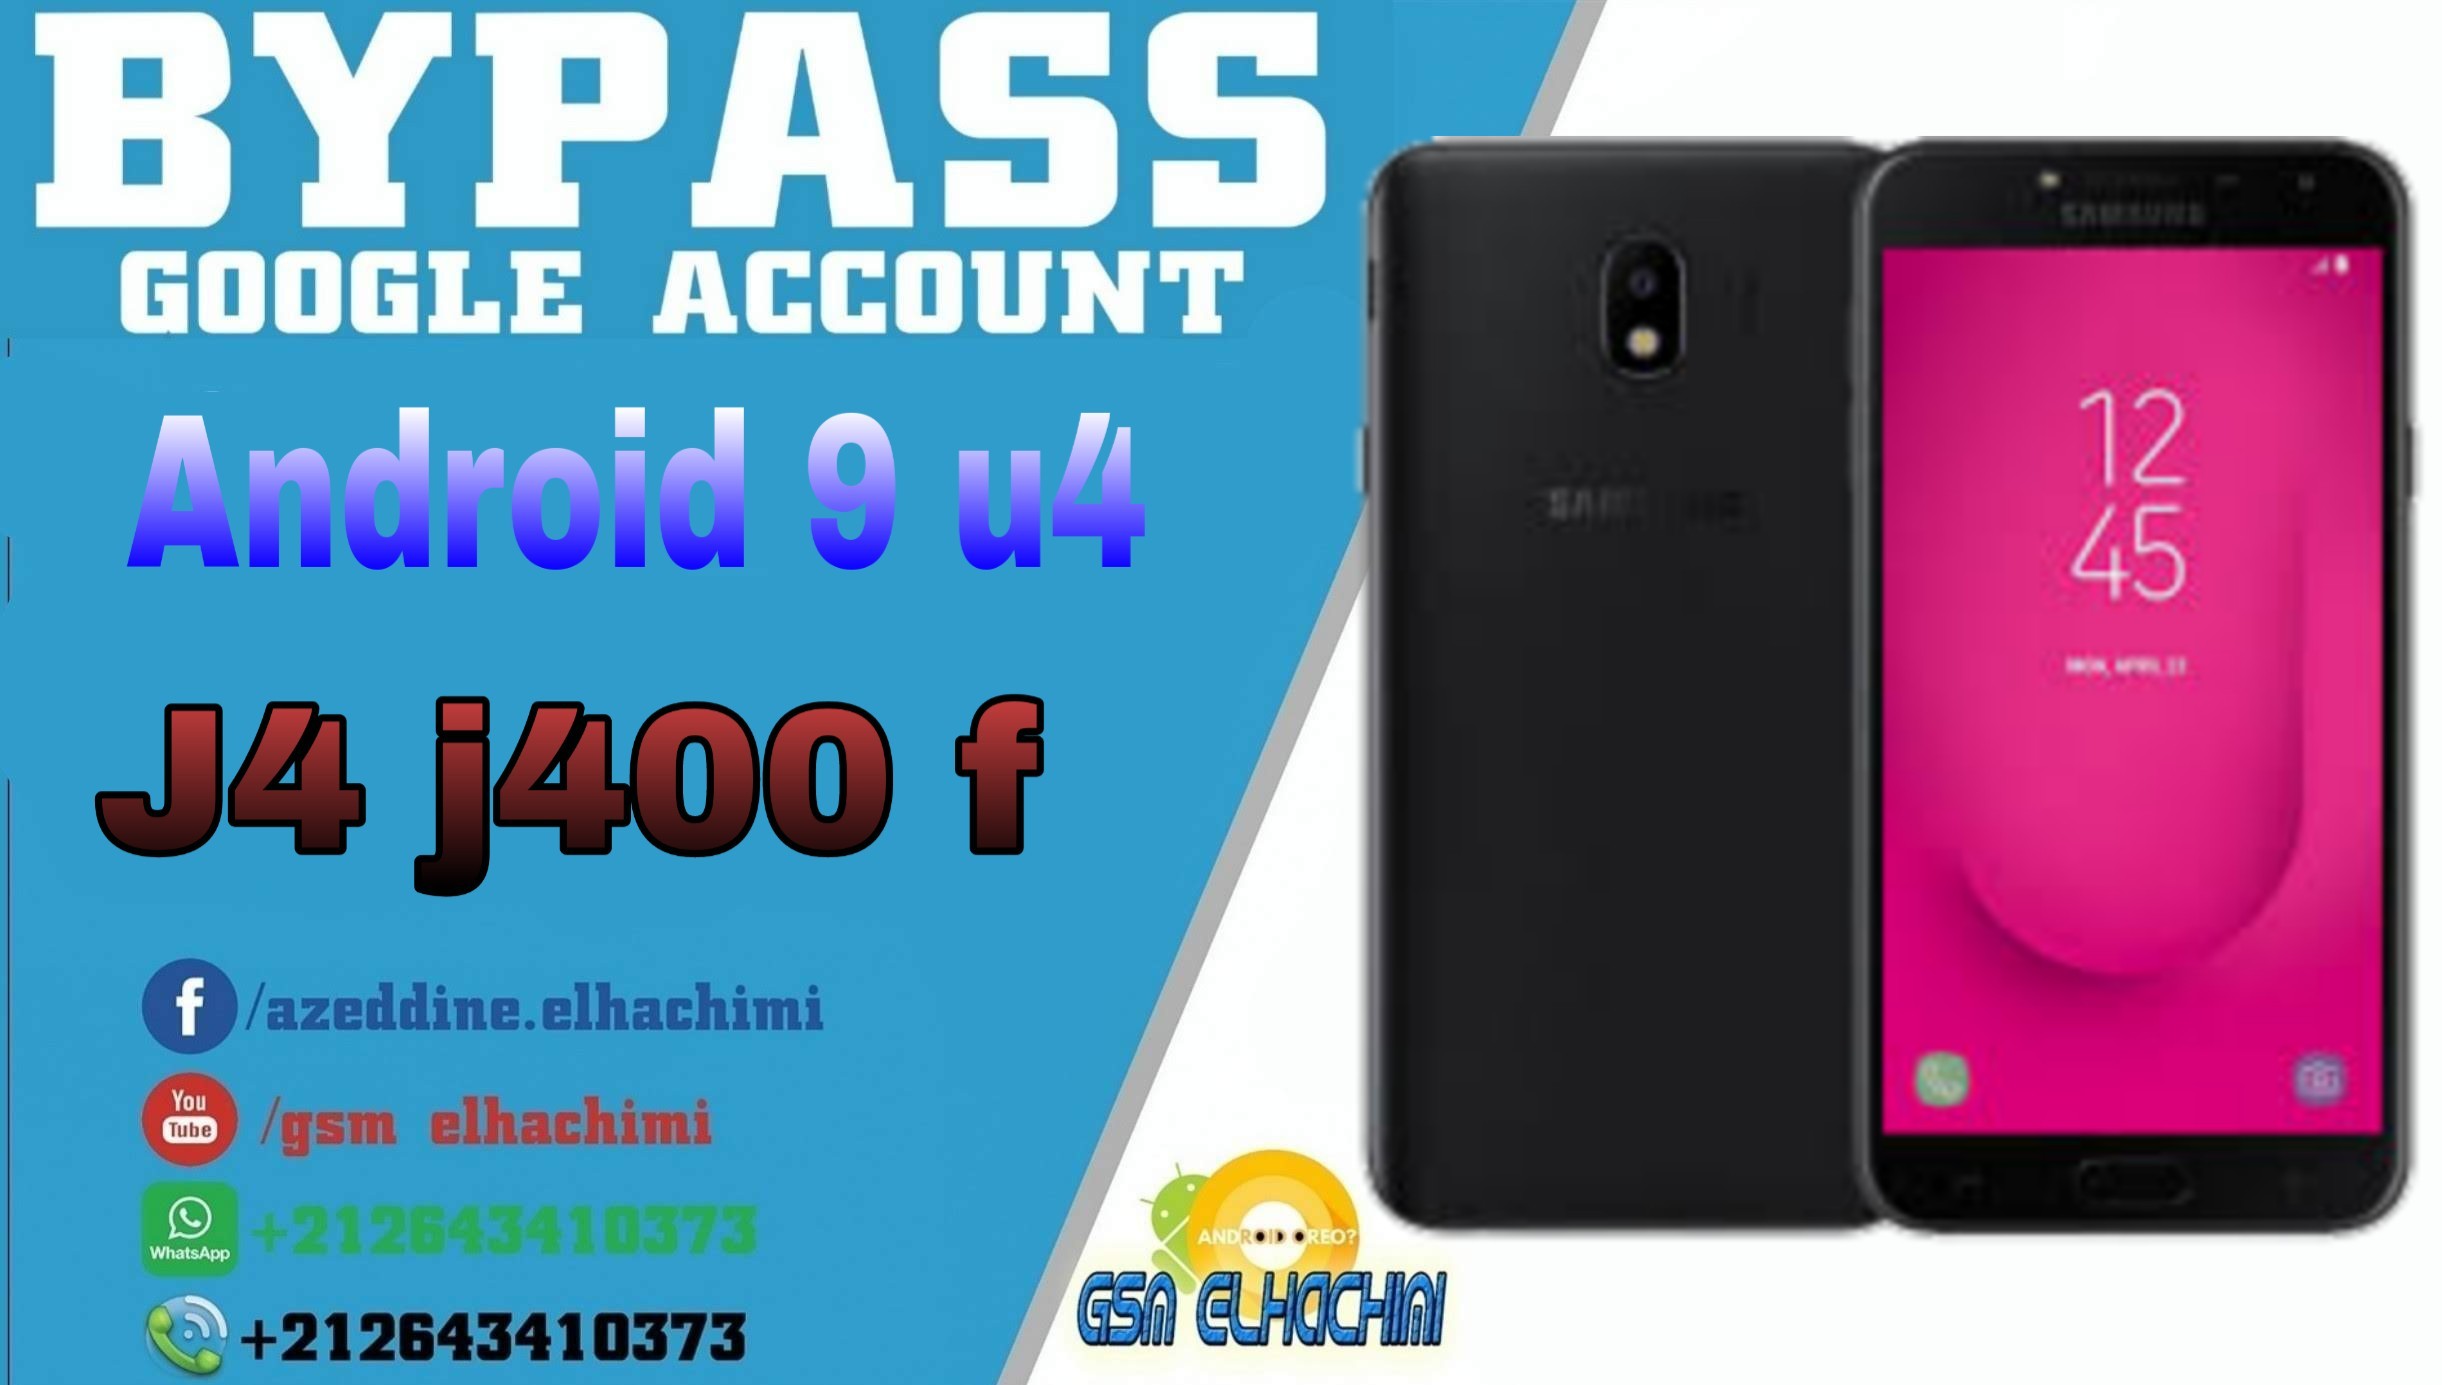 Remove frp bypass samsung j400f android 9 u4